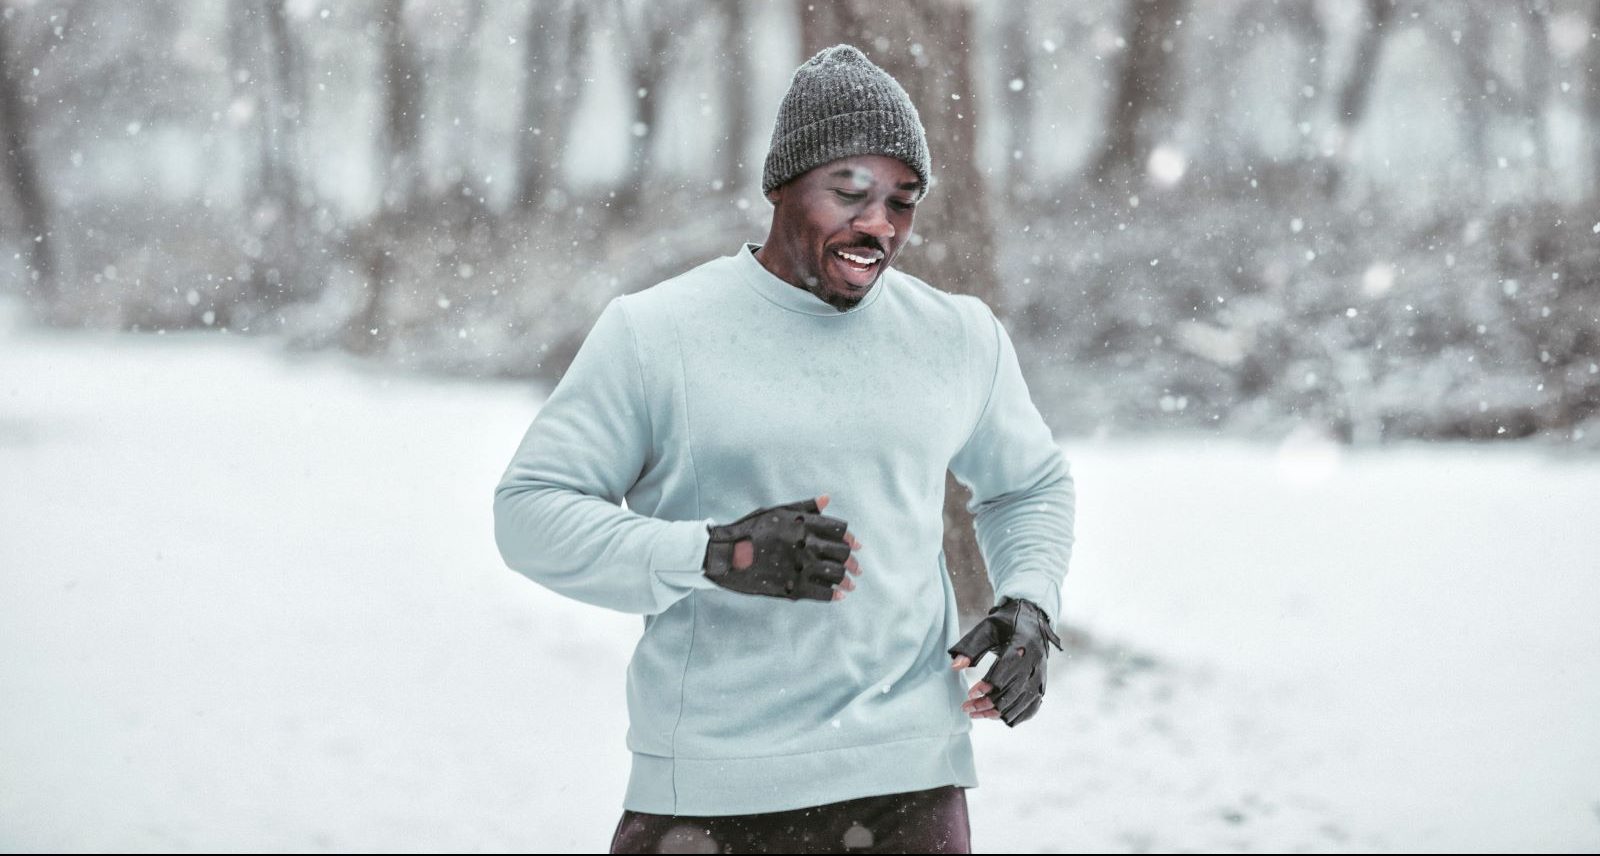 These eight tips from an expert with the Hartford HealthCare Rehabilitation Network can help you exercise safely this winter.